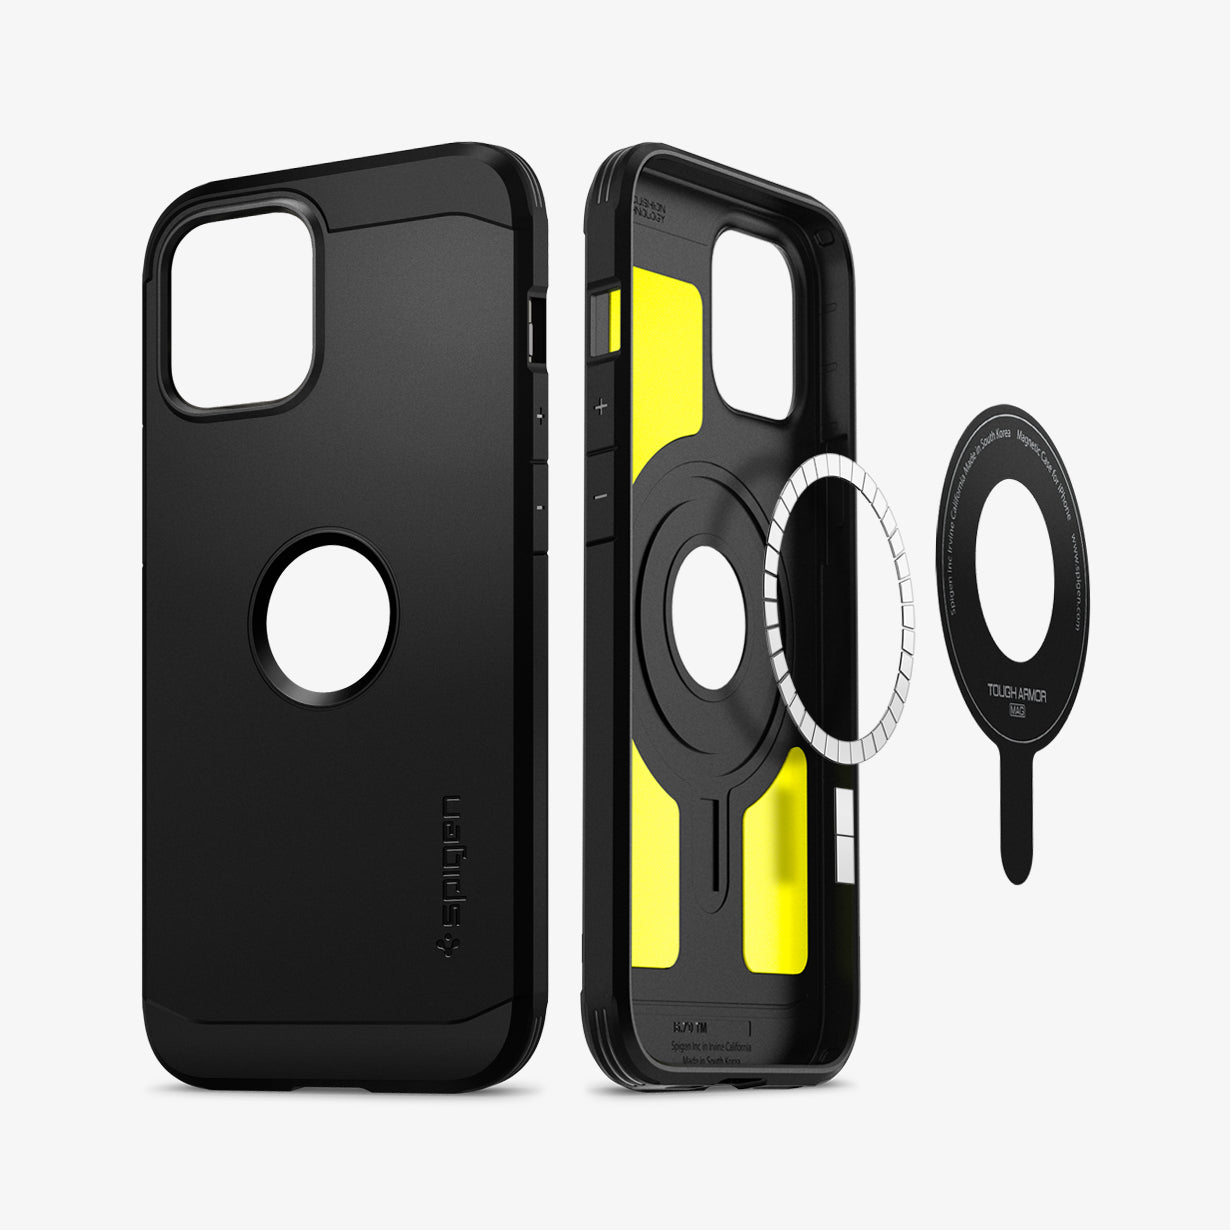 ACS02619 - iPhone 12 Pro Max Case Tough Armor Mag Safe Compatible in black showing the back and inside magnetic ring layers with no device